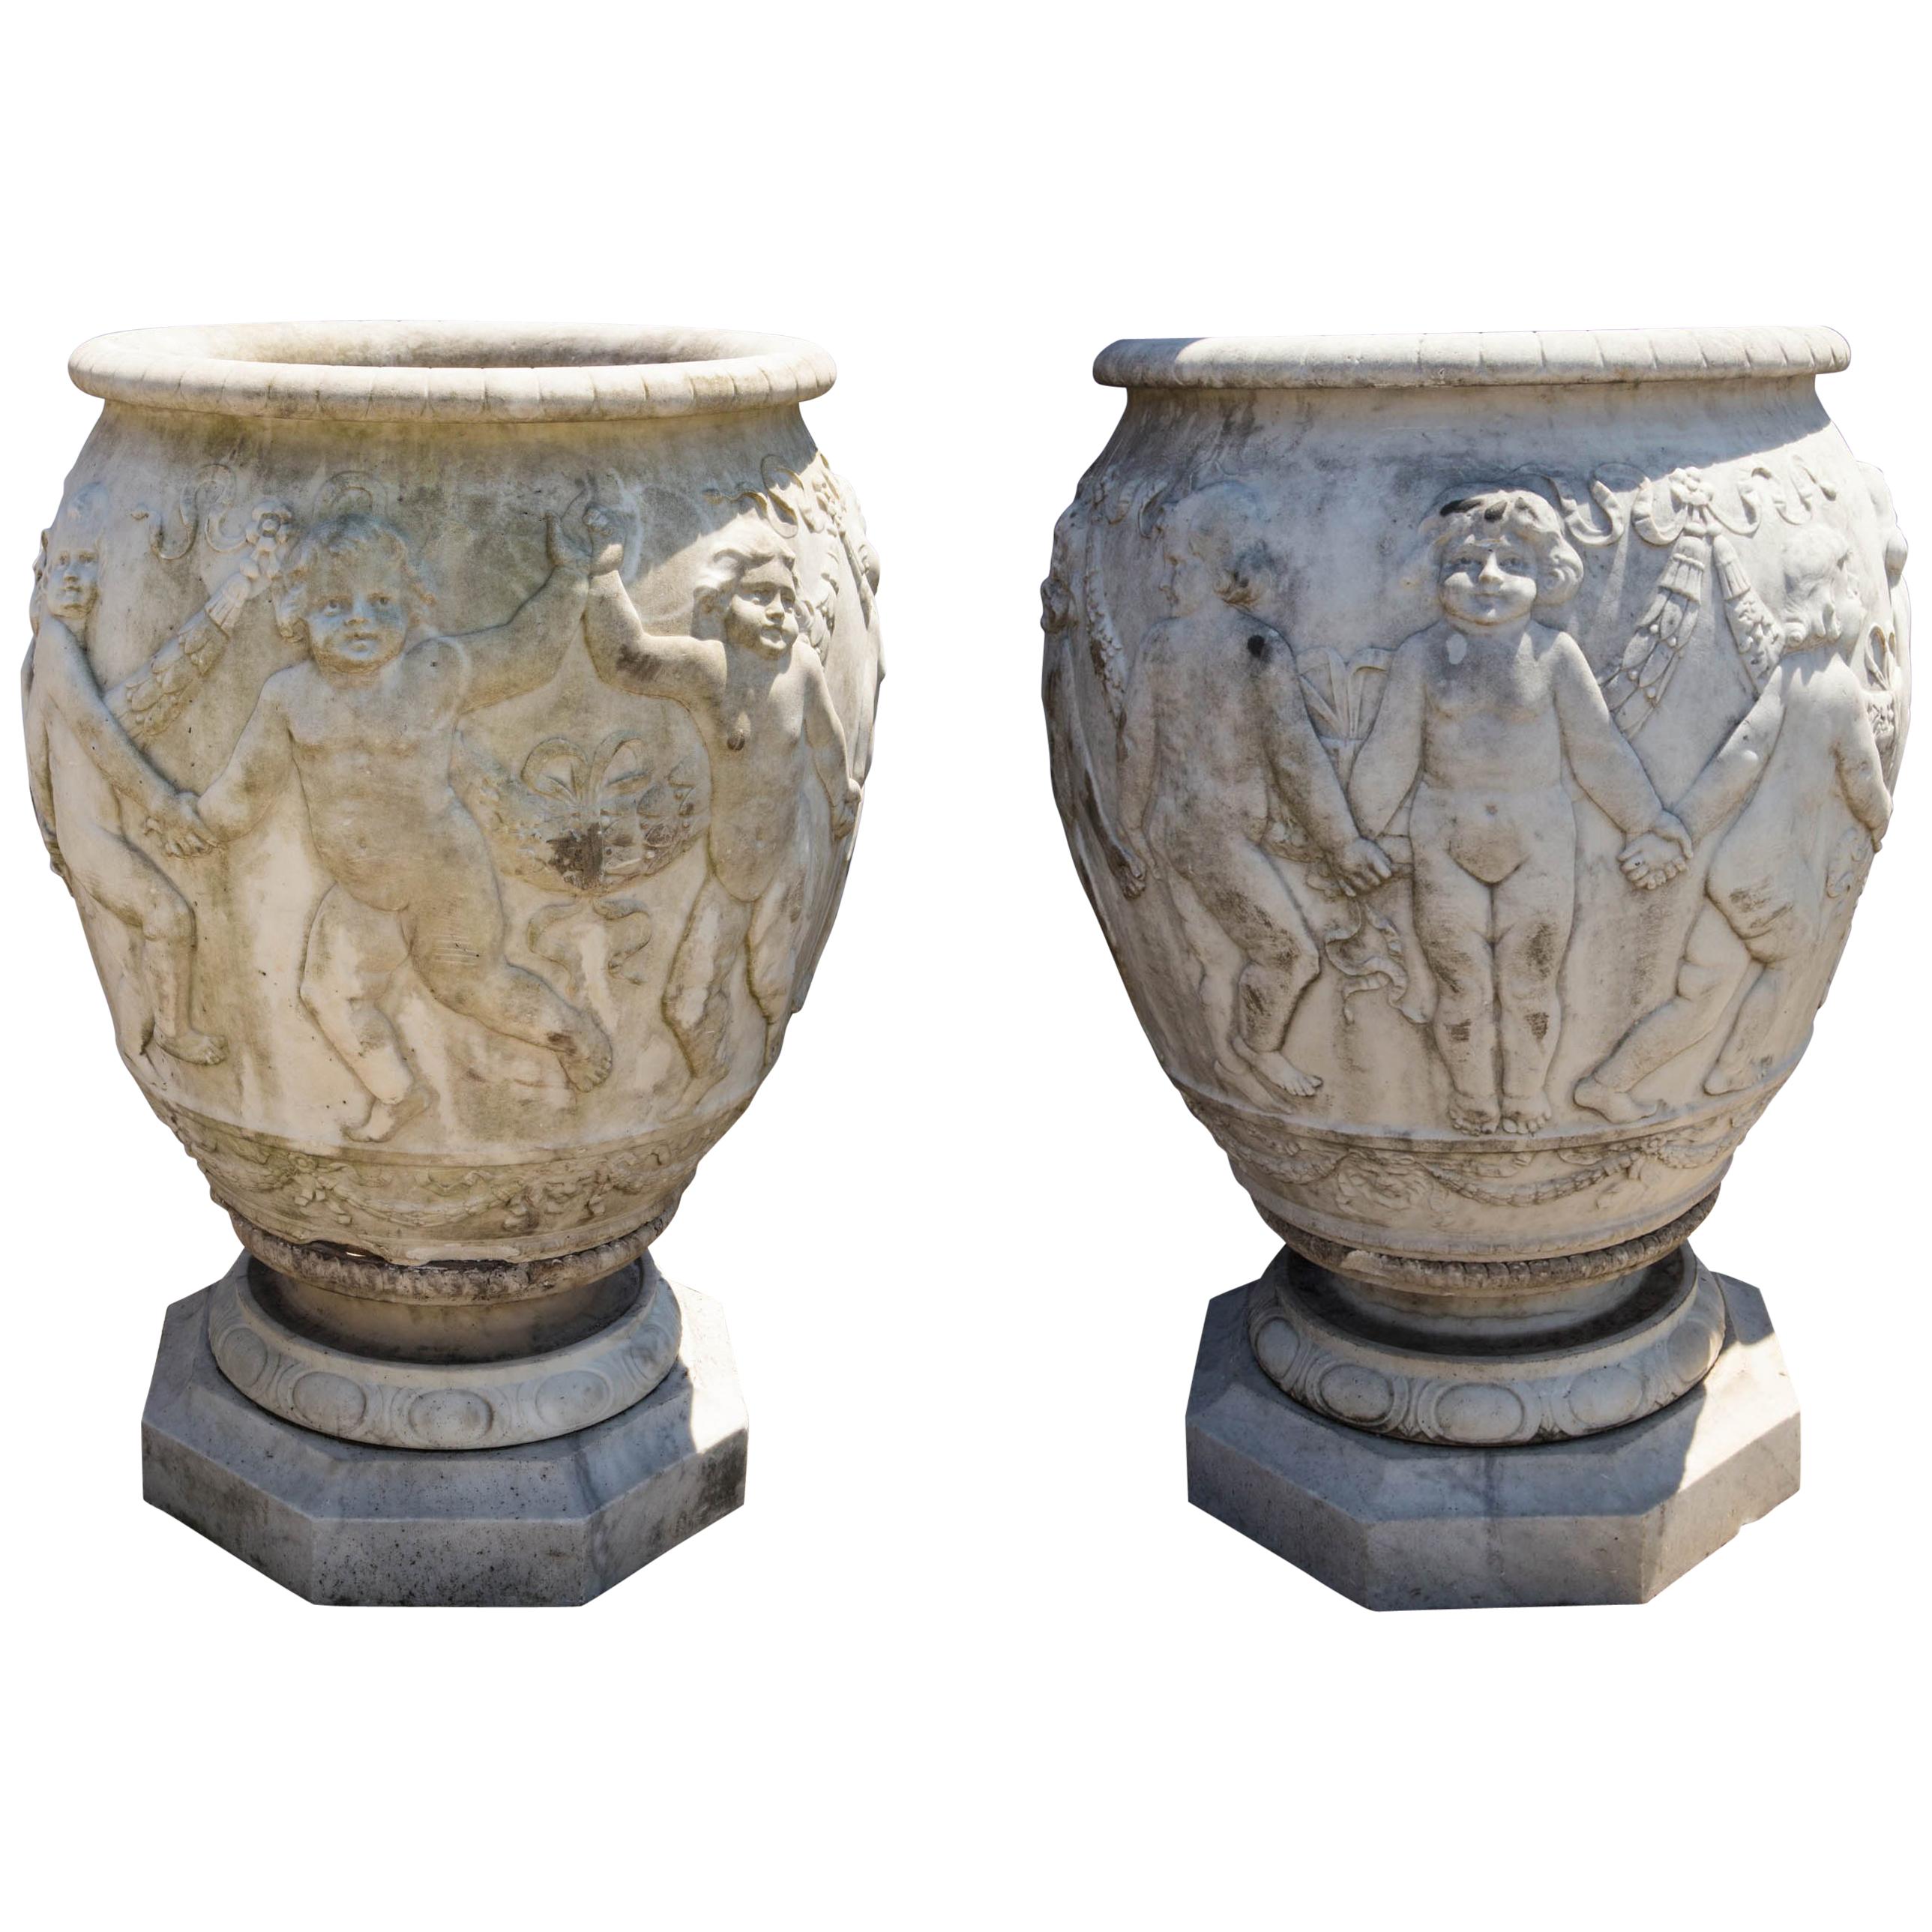 Pair of Large Antique Italian Marble Urns with Dancing Cherubs